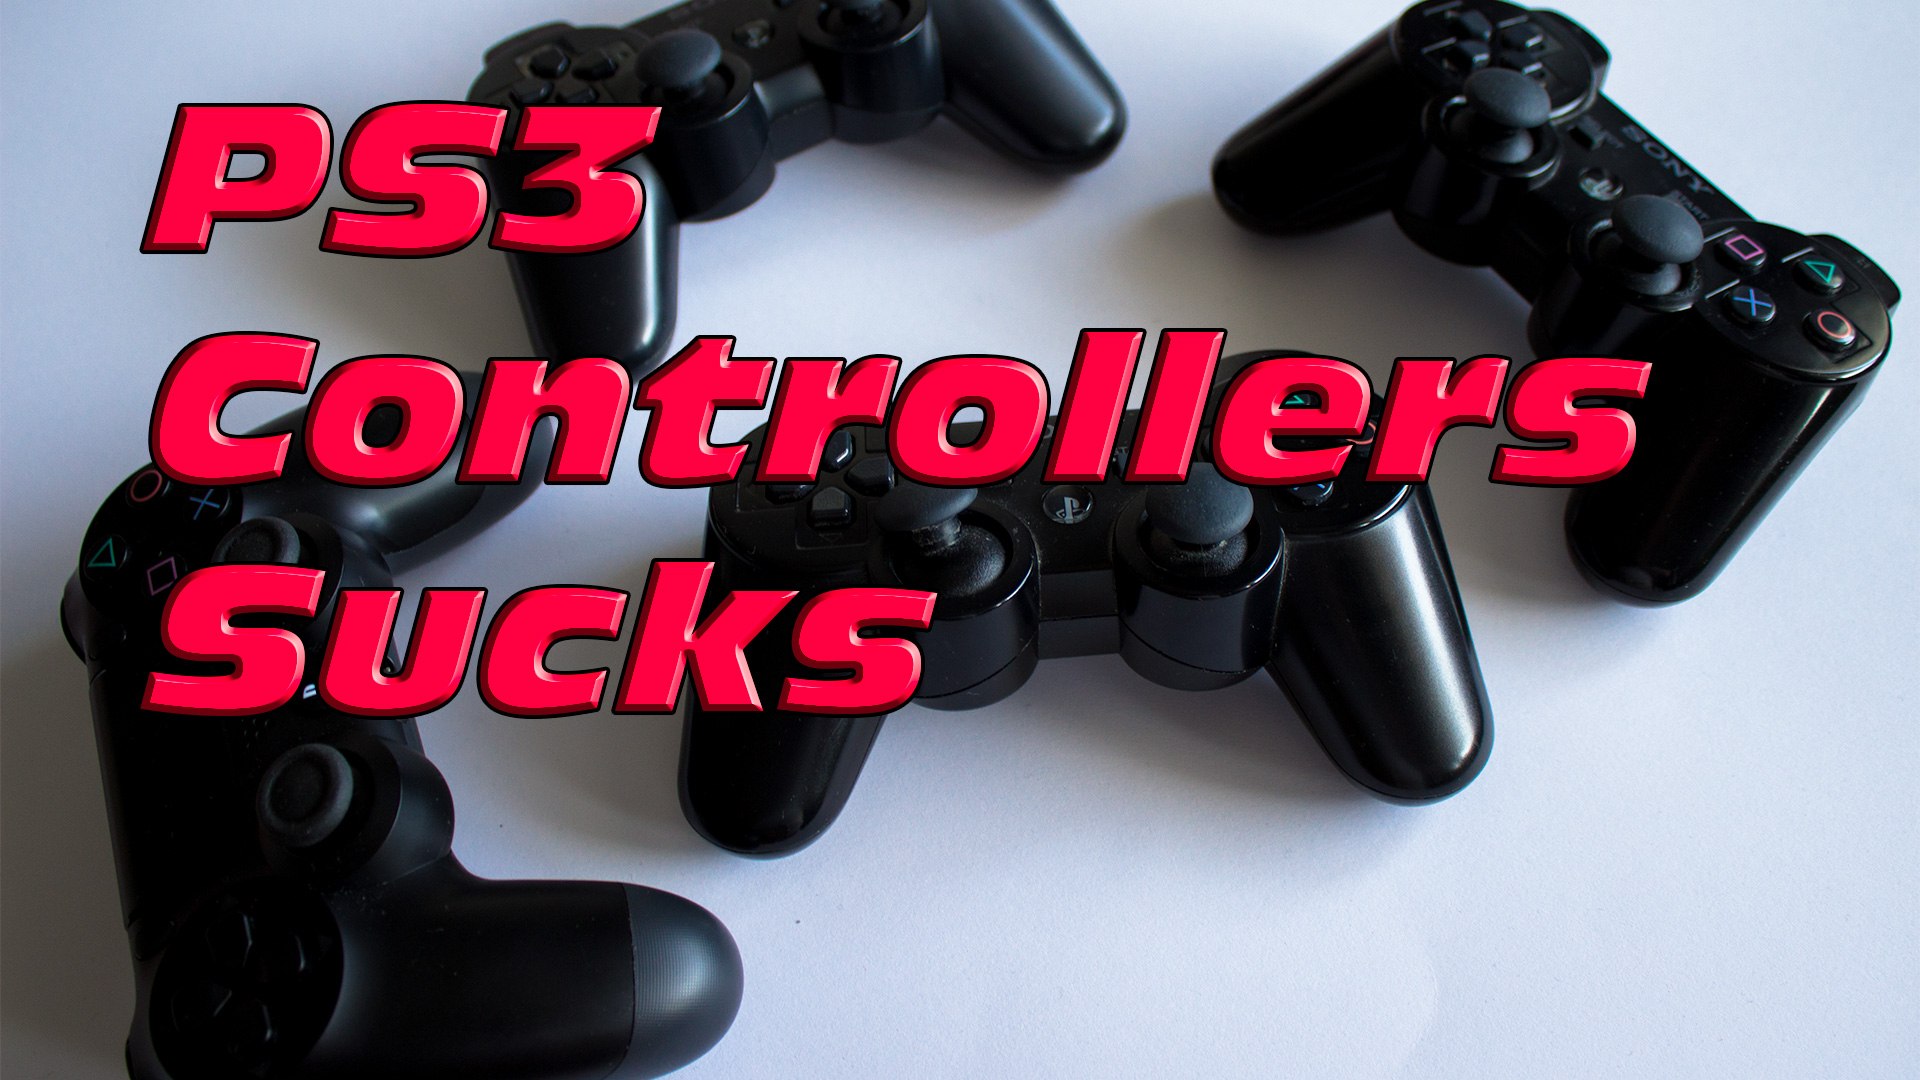 PS3 Controllers Sucks! - video Dailymotion